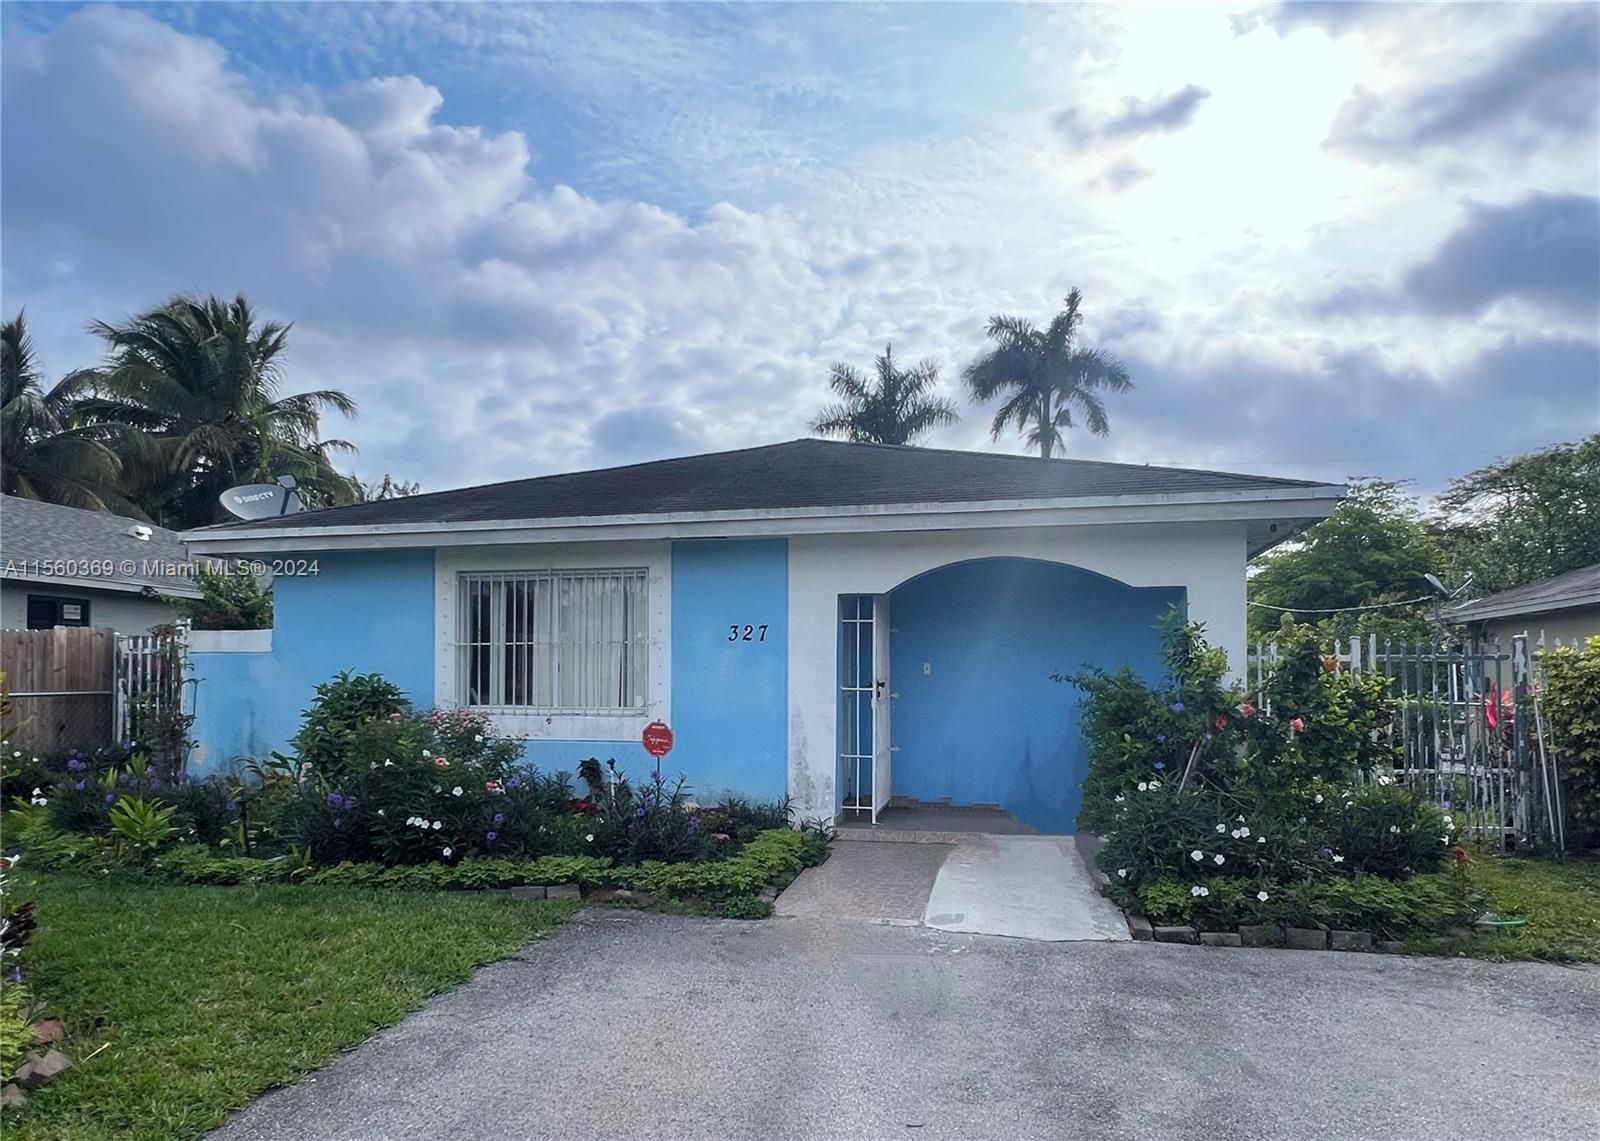 Photo of 327 NW 5th Ave in Homestead, FL